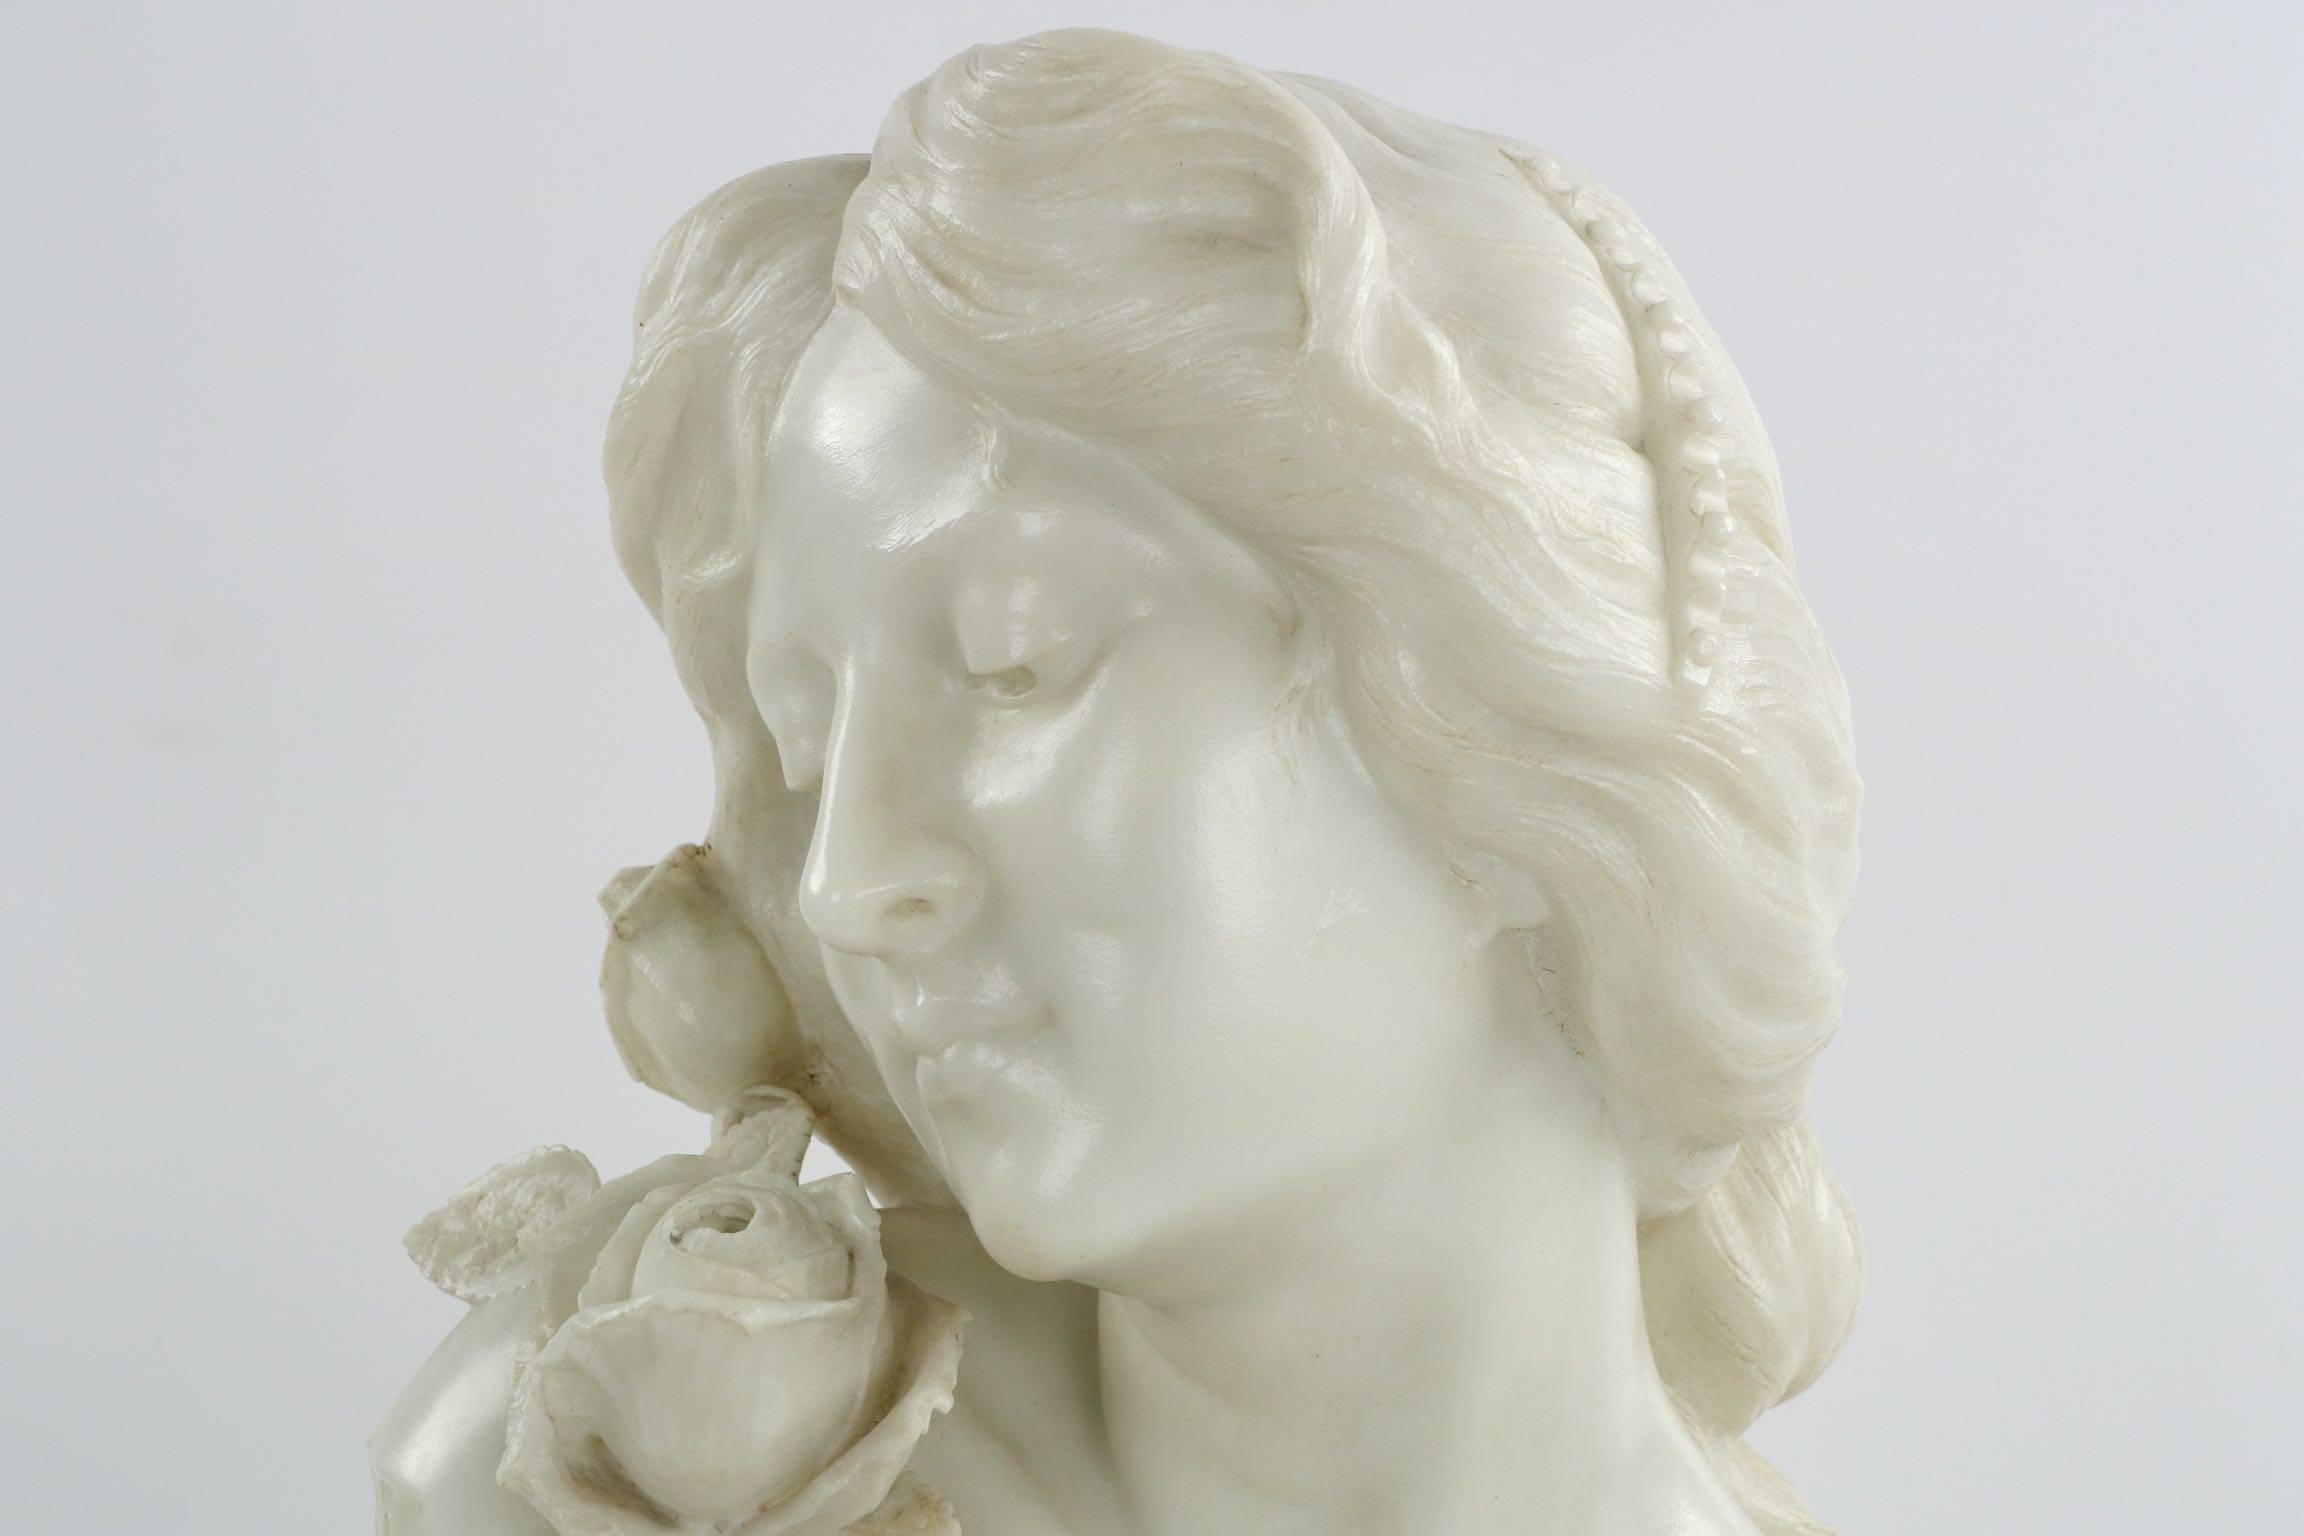 A very finely carved sculpture of a young woman in spring, the surface is detailed with incredible clarity and precision. Her hair is perfect in it’s complex styling, much of the individual hair strands incised as they fall over her bare shoulders.